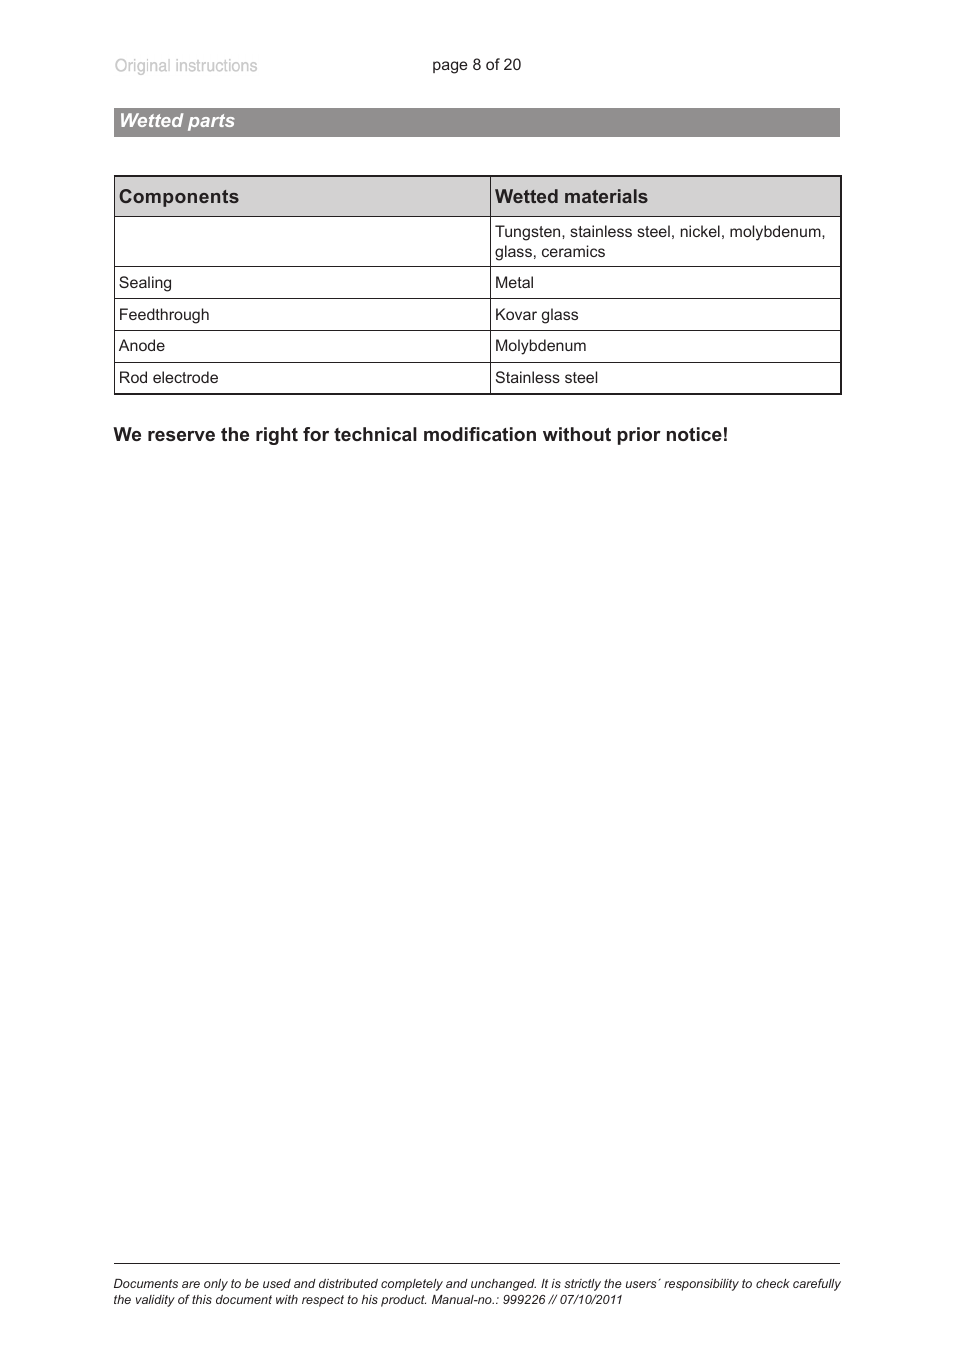 Wetted parts | VACUUBRAND MPT 200 User Manual | Page 8 / 20